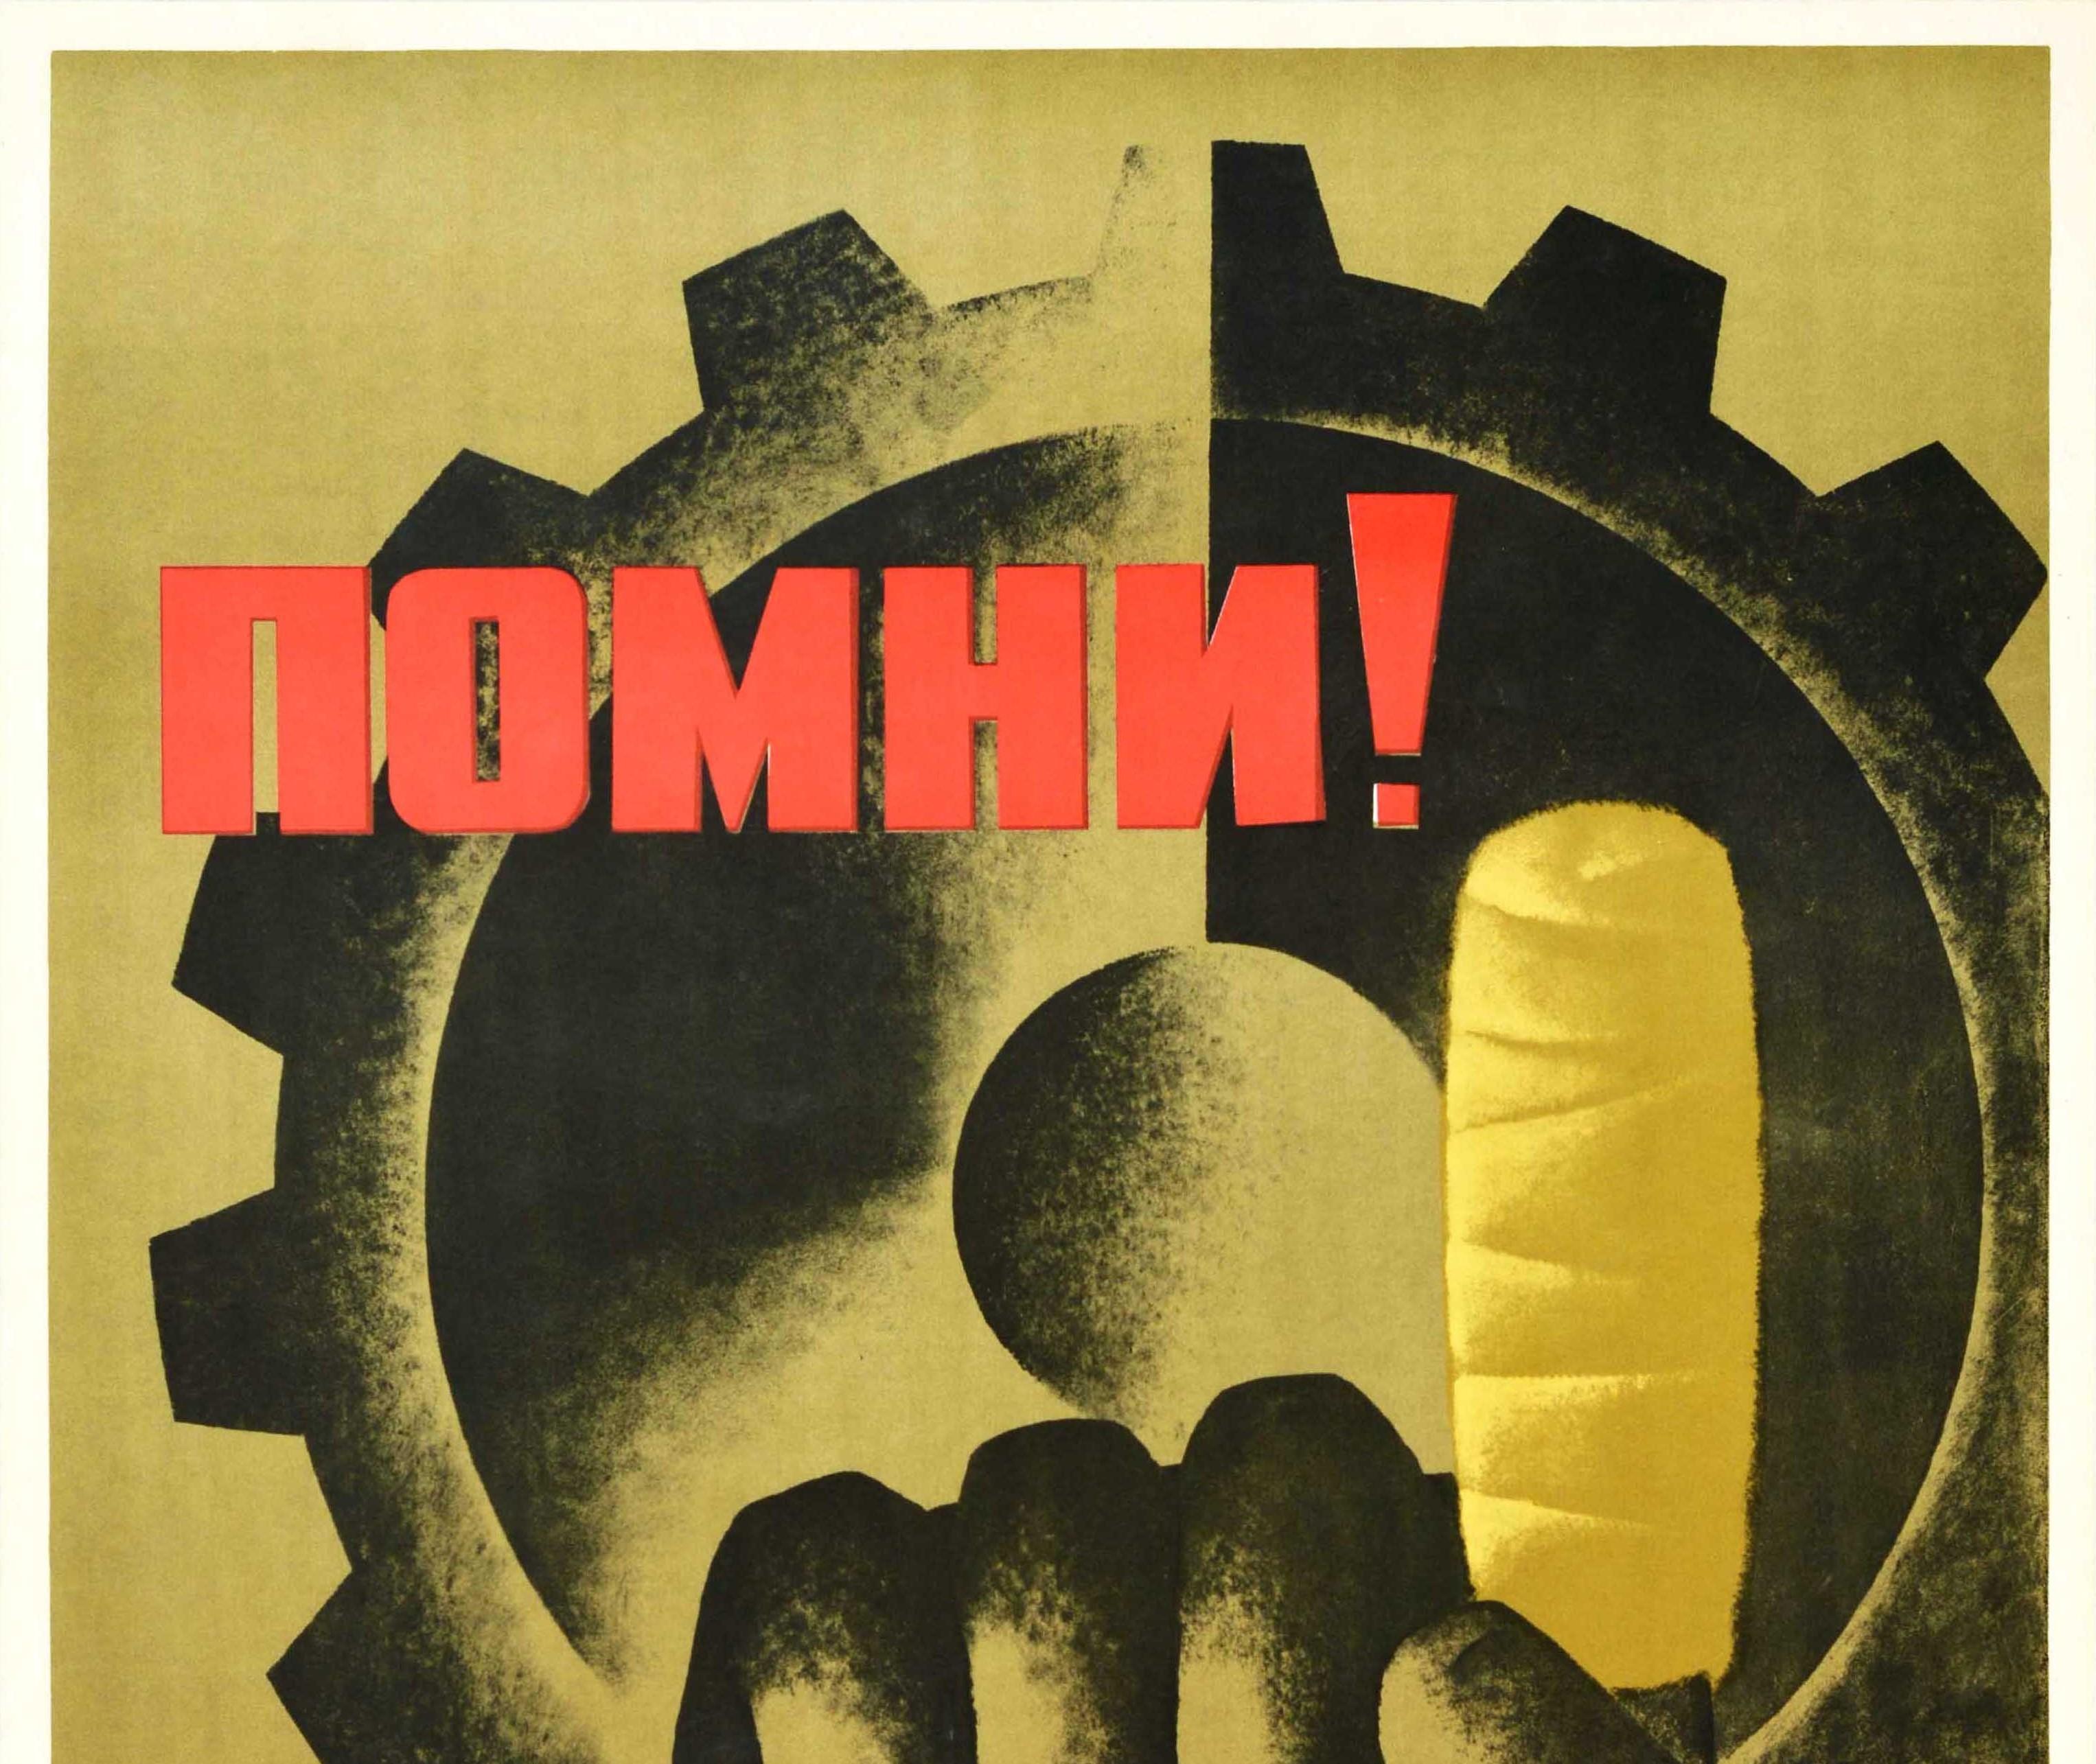 Original vintage Soviet work safety propaganda poster - Remember! Machines do not forgive mistakes - featuring an illustration of a finger wrapped in a bandage in front of a gear cog wheel with the bold red warning lettering above and below.